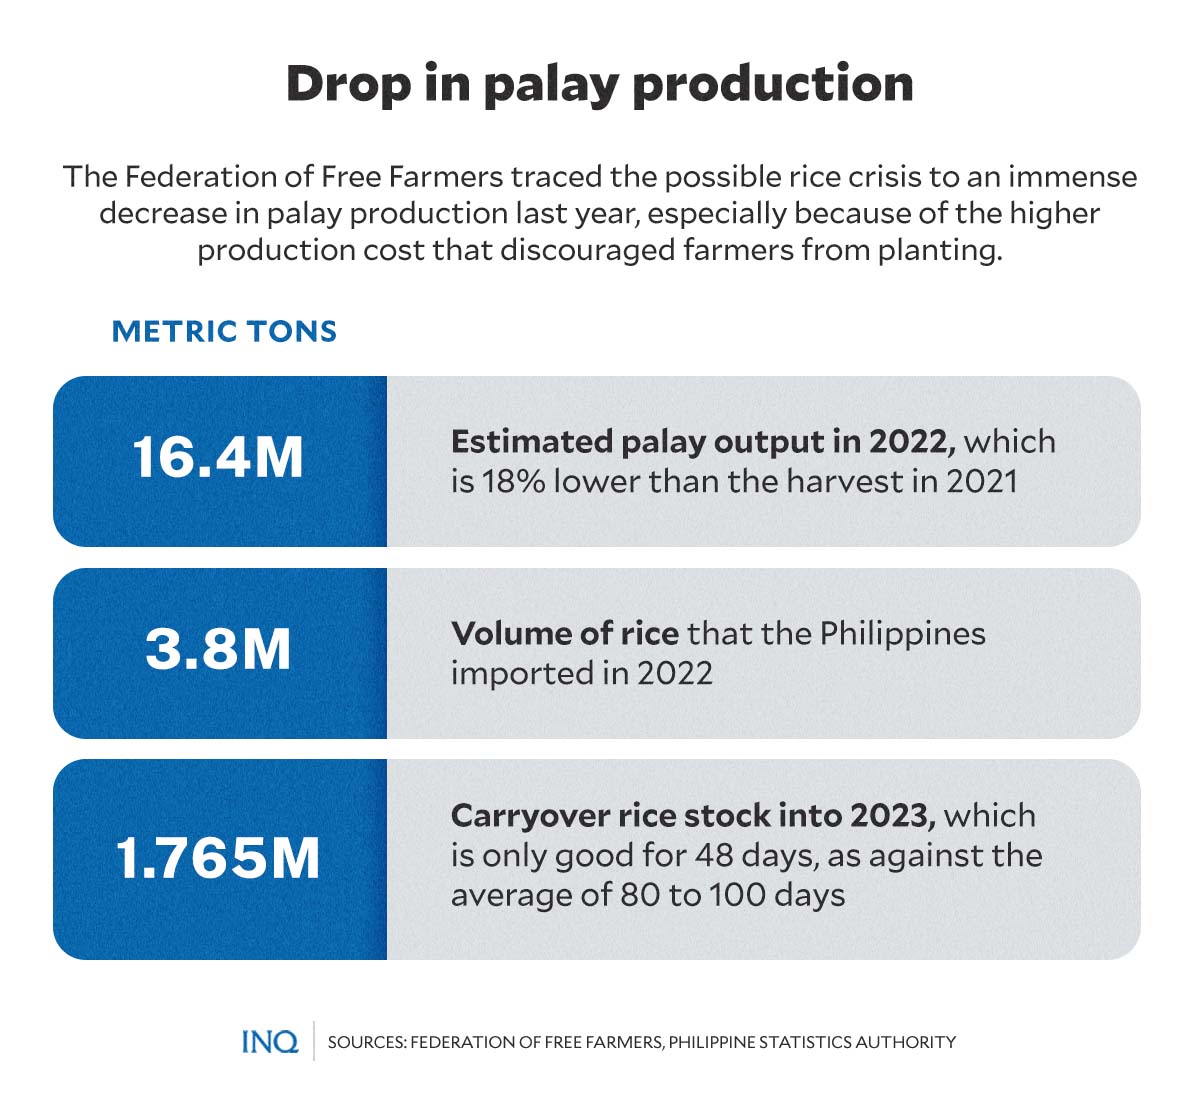 DROP IN PALAY PRODUCTION